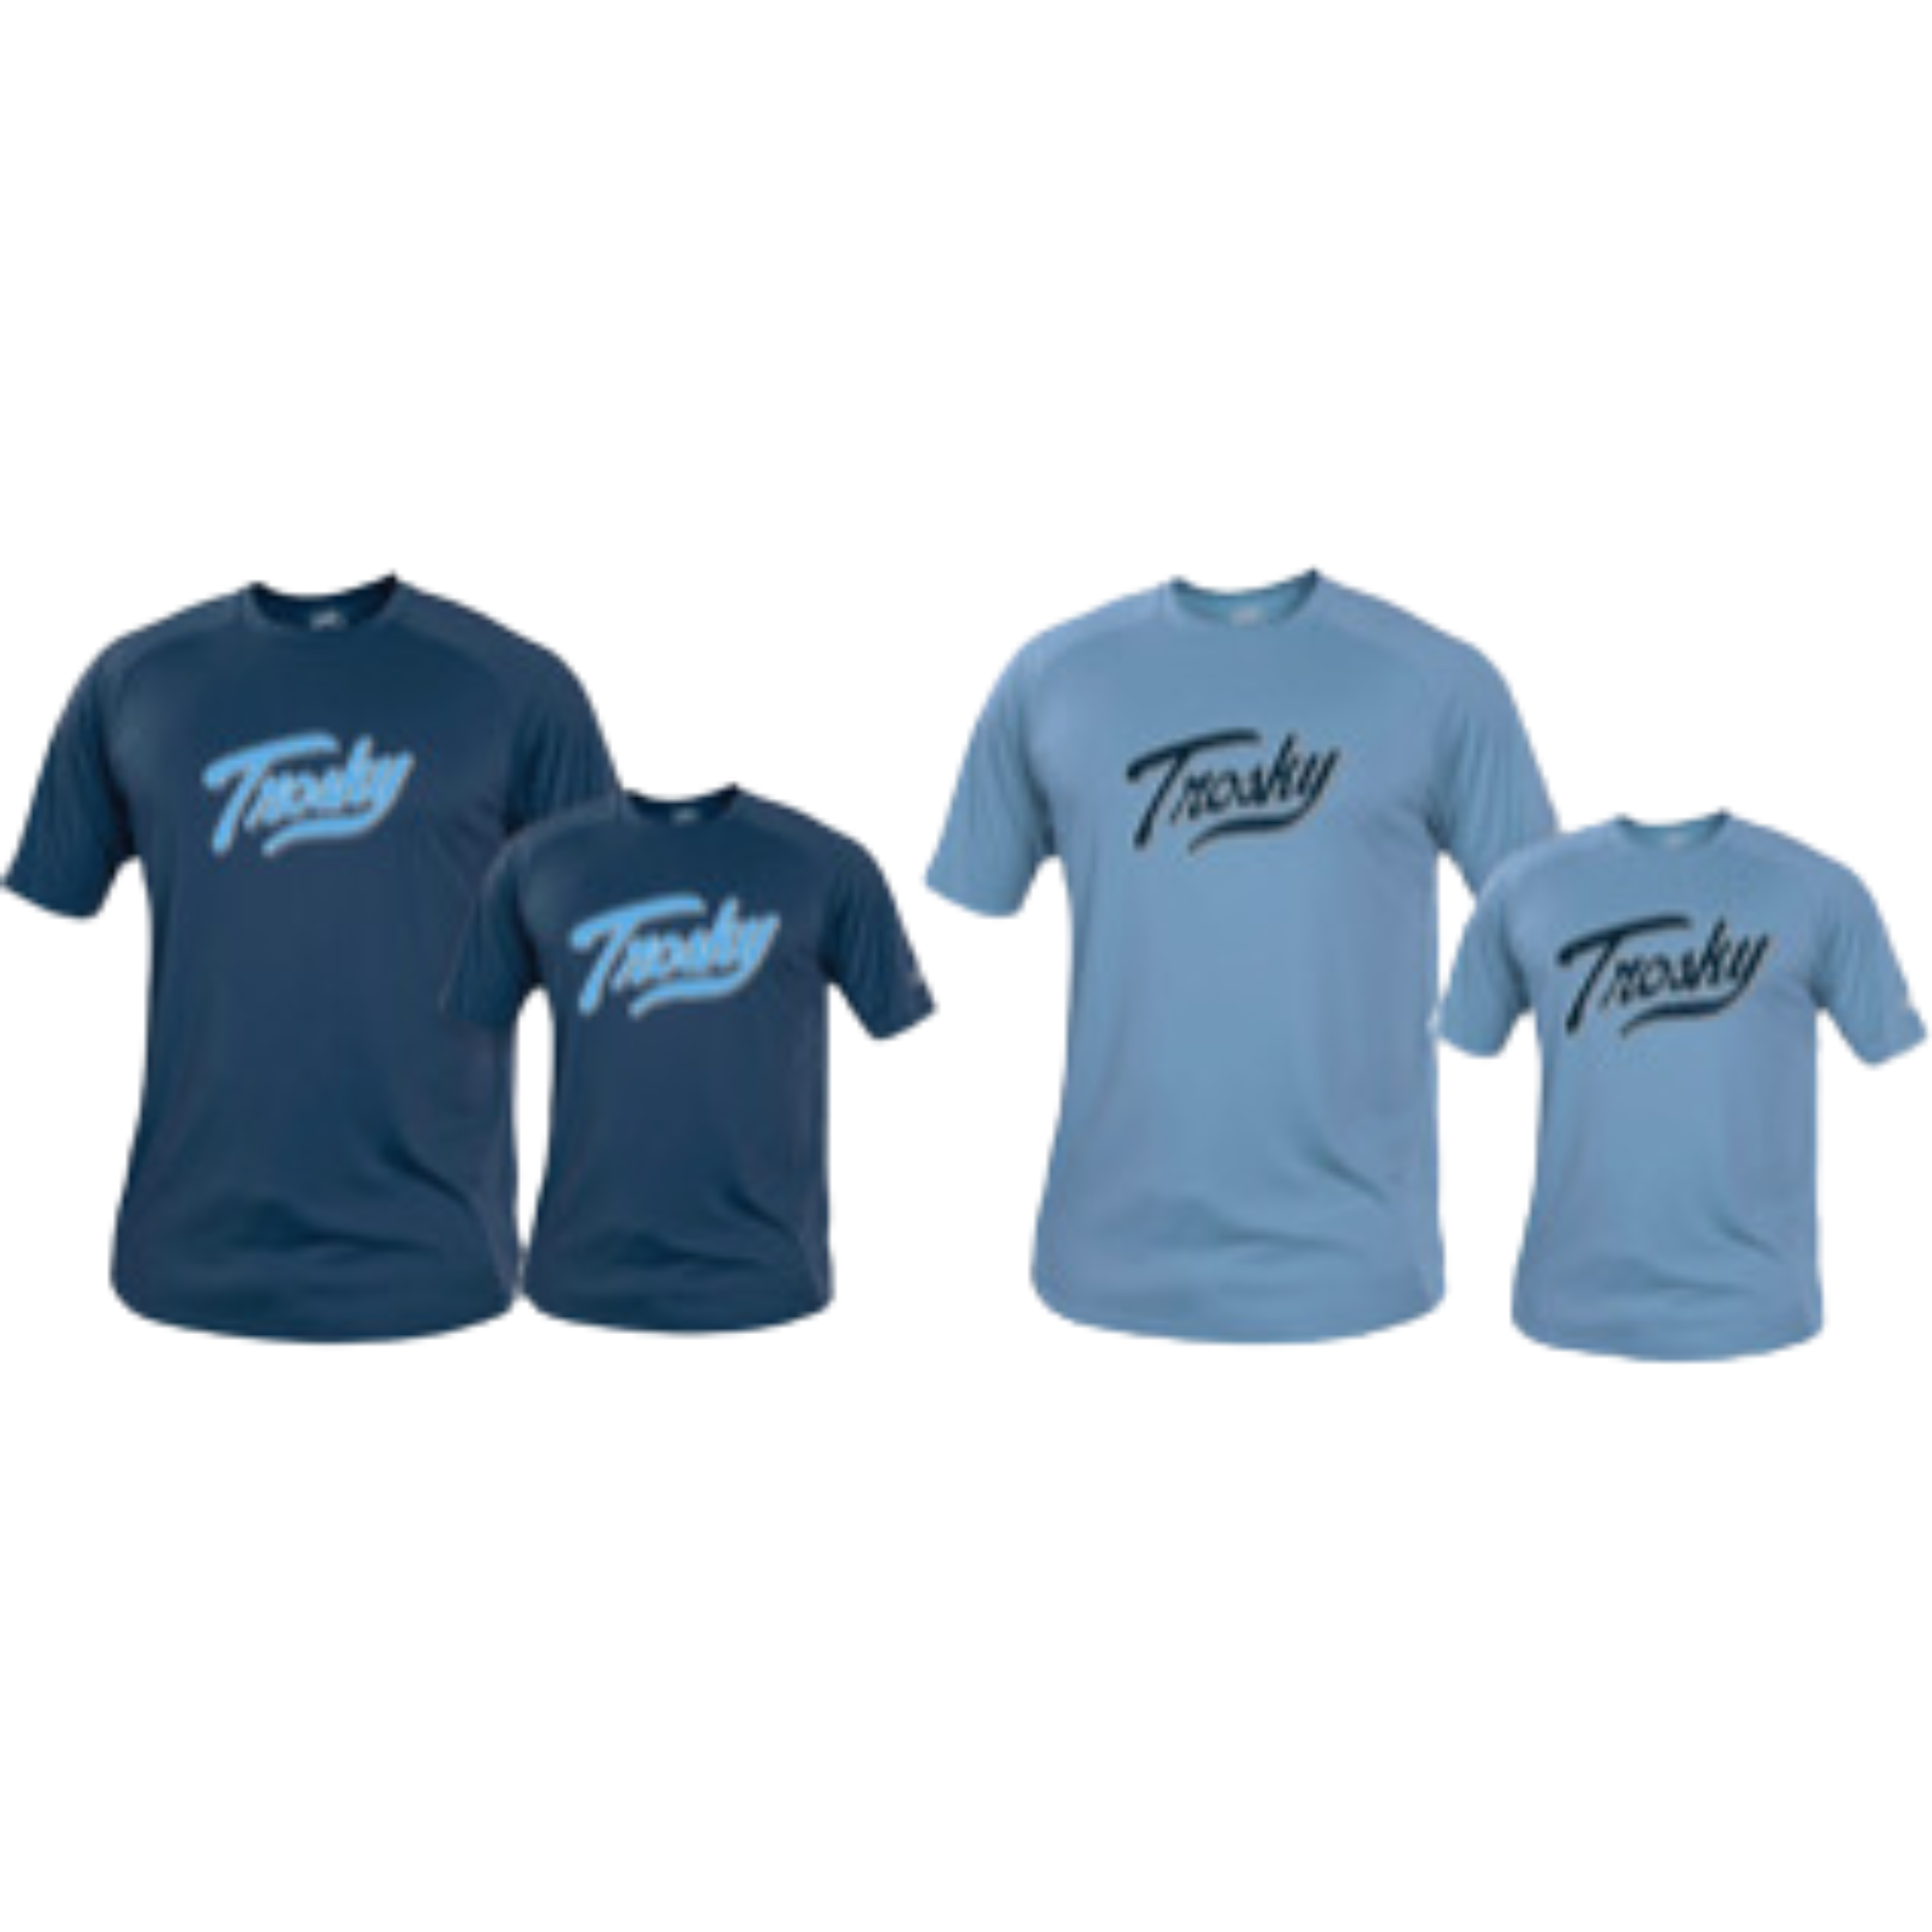 Rawlings Adult Trosky Fan Gear Numbered Performance Tee (set of 2 Col. Blue & Navy) - S